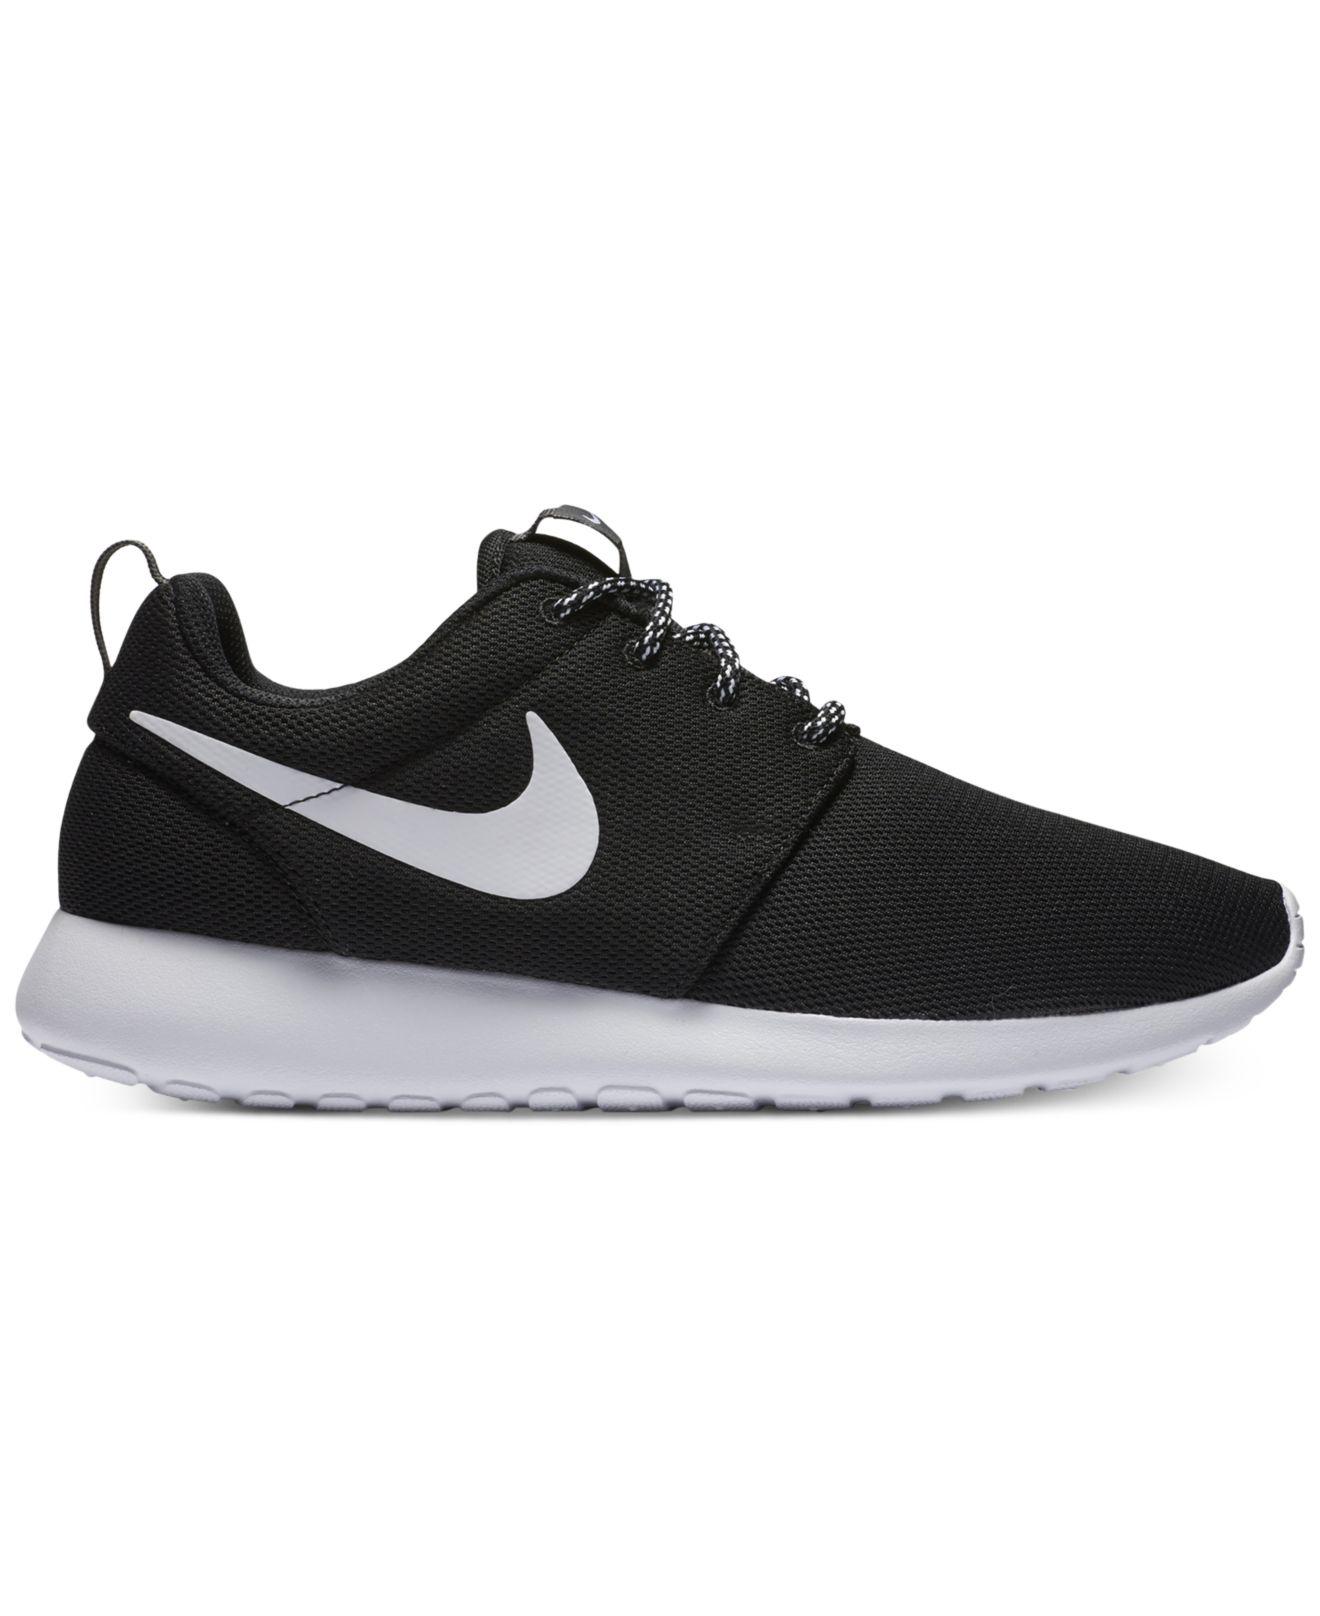 Nike Roshe One Women's Lifestyle Shoes in Black - Save 27% - Lyst